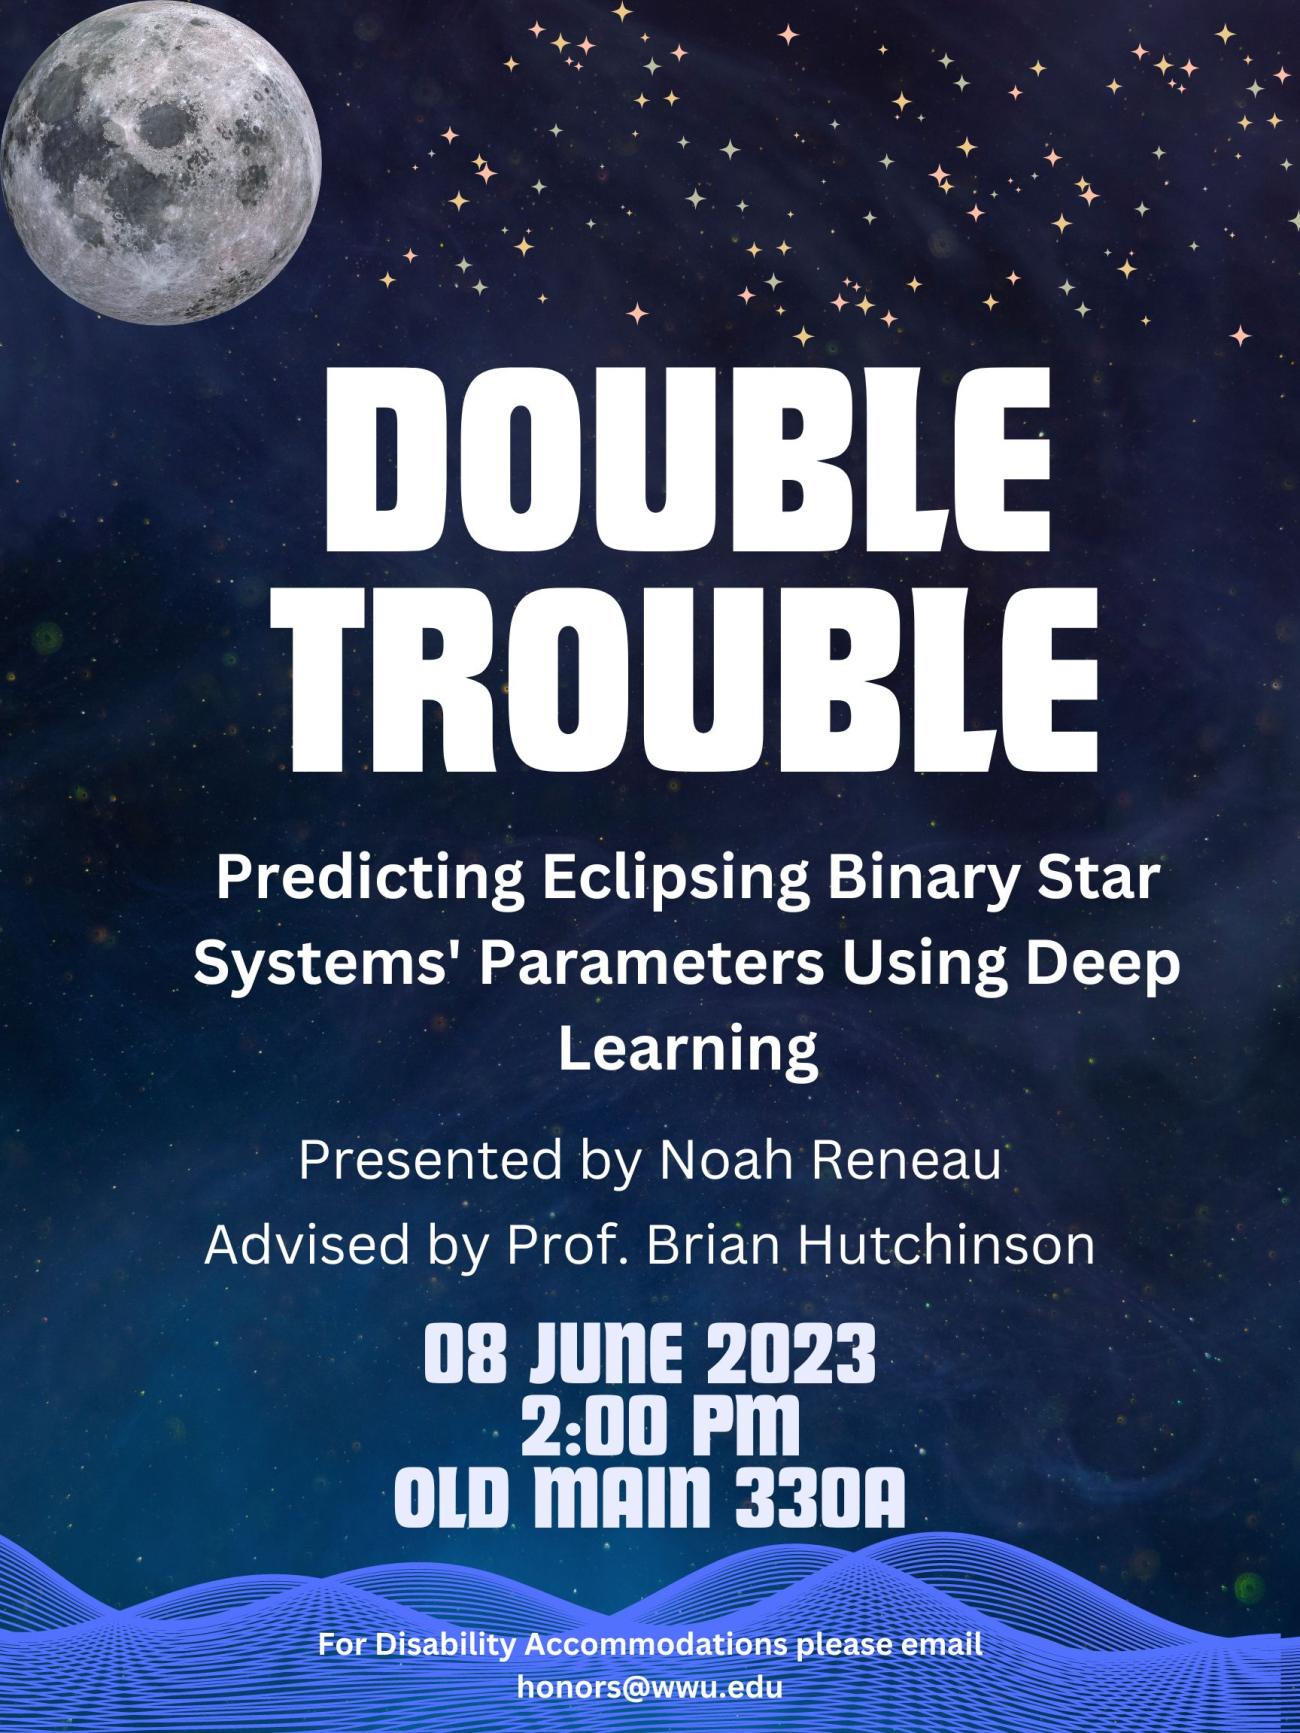 A dark blue poster with a moon, stars, and hyperbolic hills. Text reads: "Double Trouble, Predicting Eclipsing Binary Star Systems' Parameters Using Deep Learning. Presented by Noah Reneau, Advised by Prof. Brian Hutchinson. 08 June, 2023, 2:00 pm, Old Main 330A. For disability accommodations please email honors@wwu.edu."